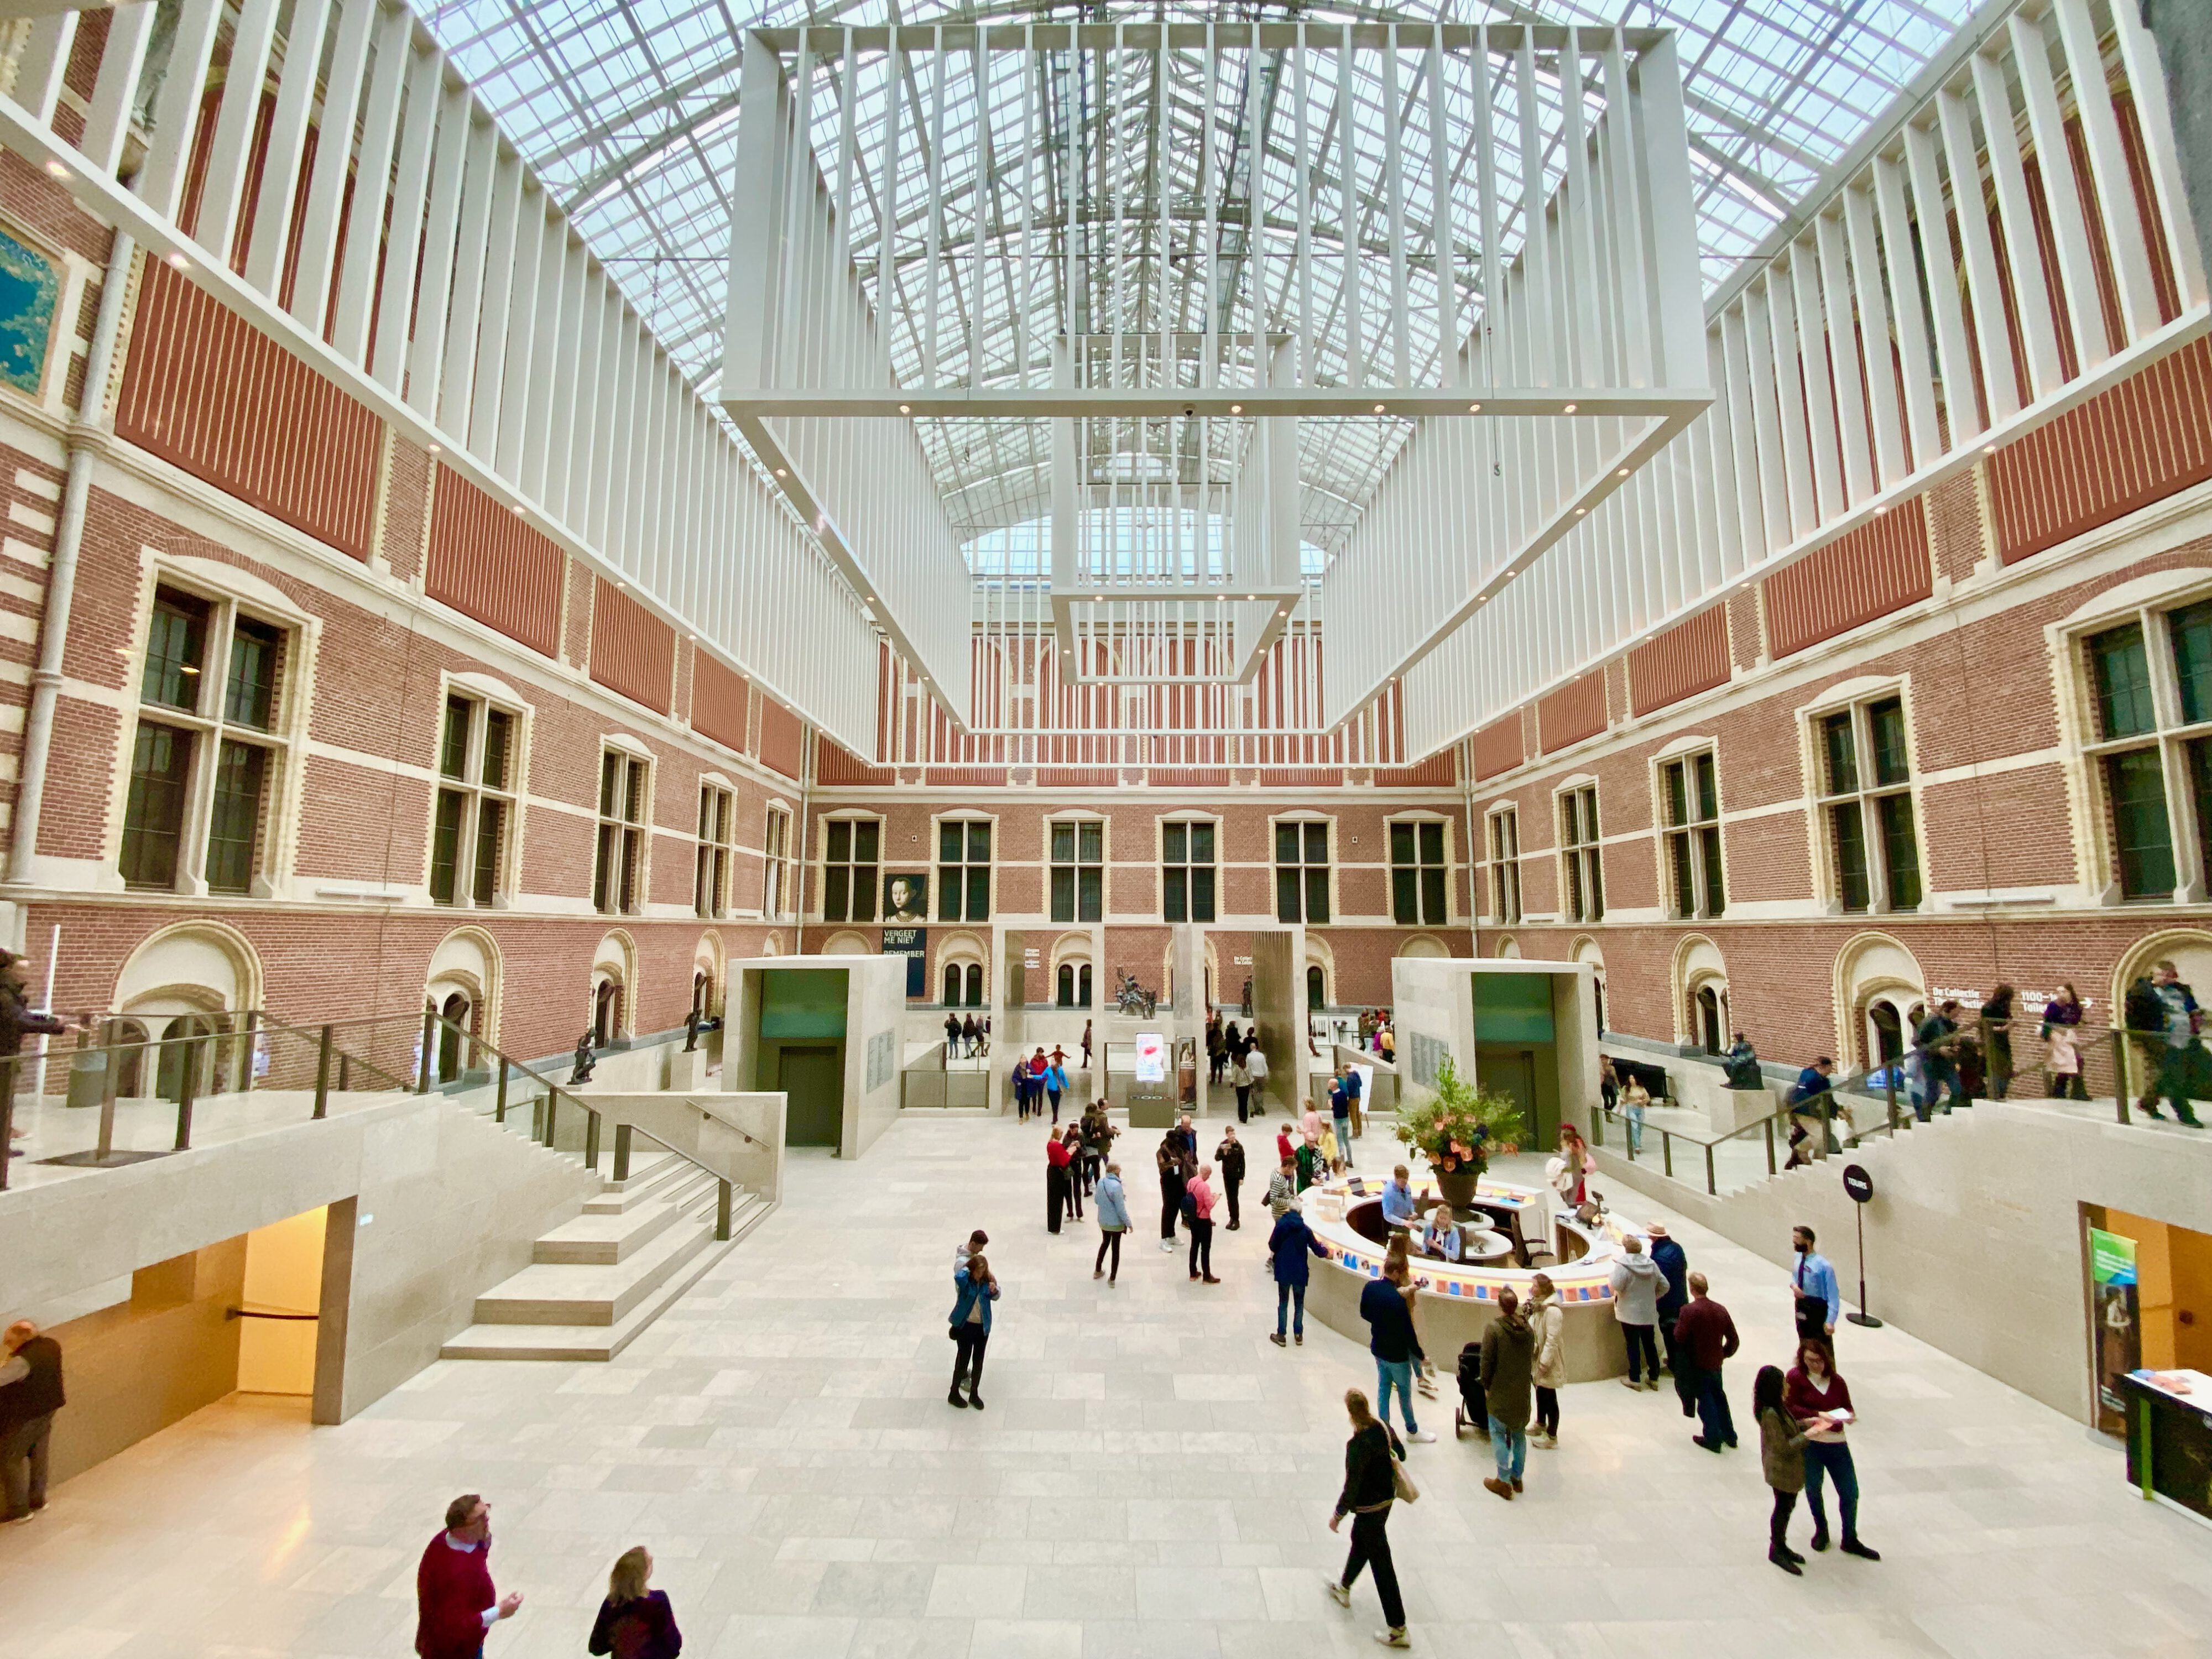 The Rijksmuseum is the national museum of the Netherlands dedicated to Dutch arts and history.